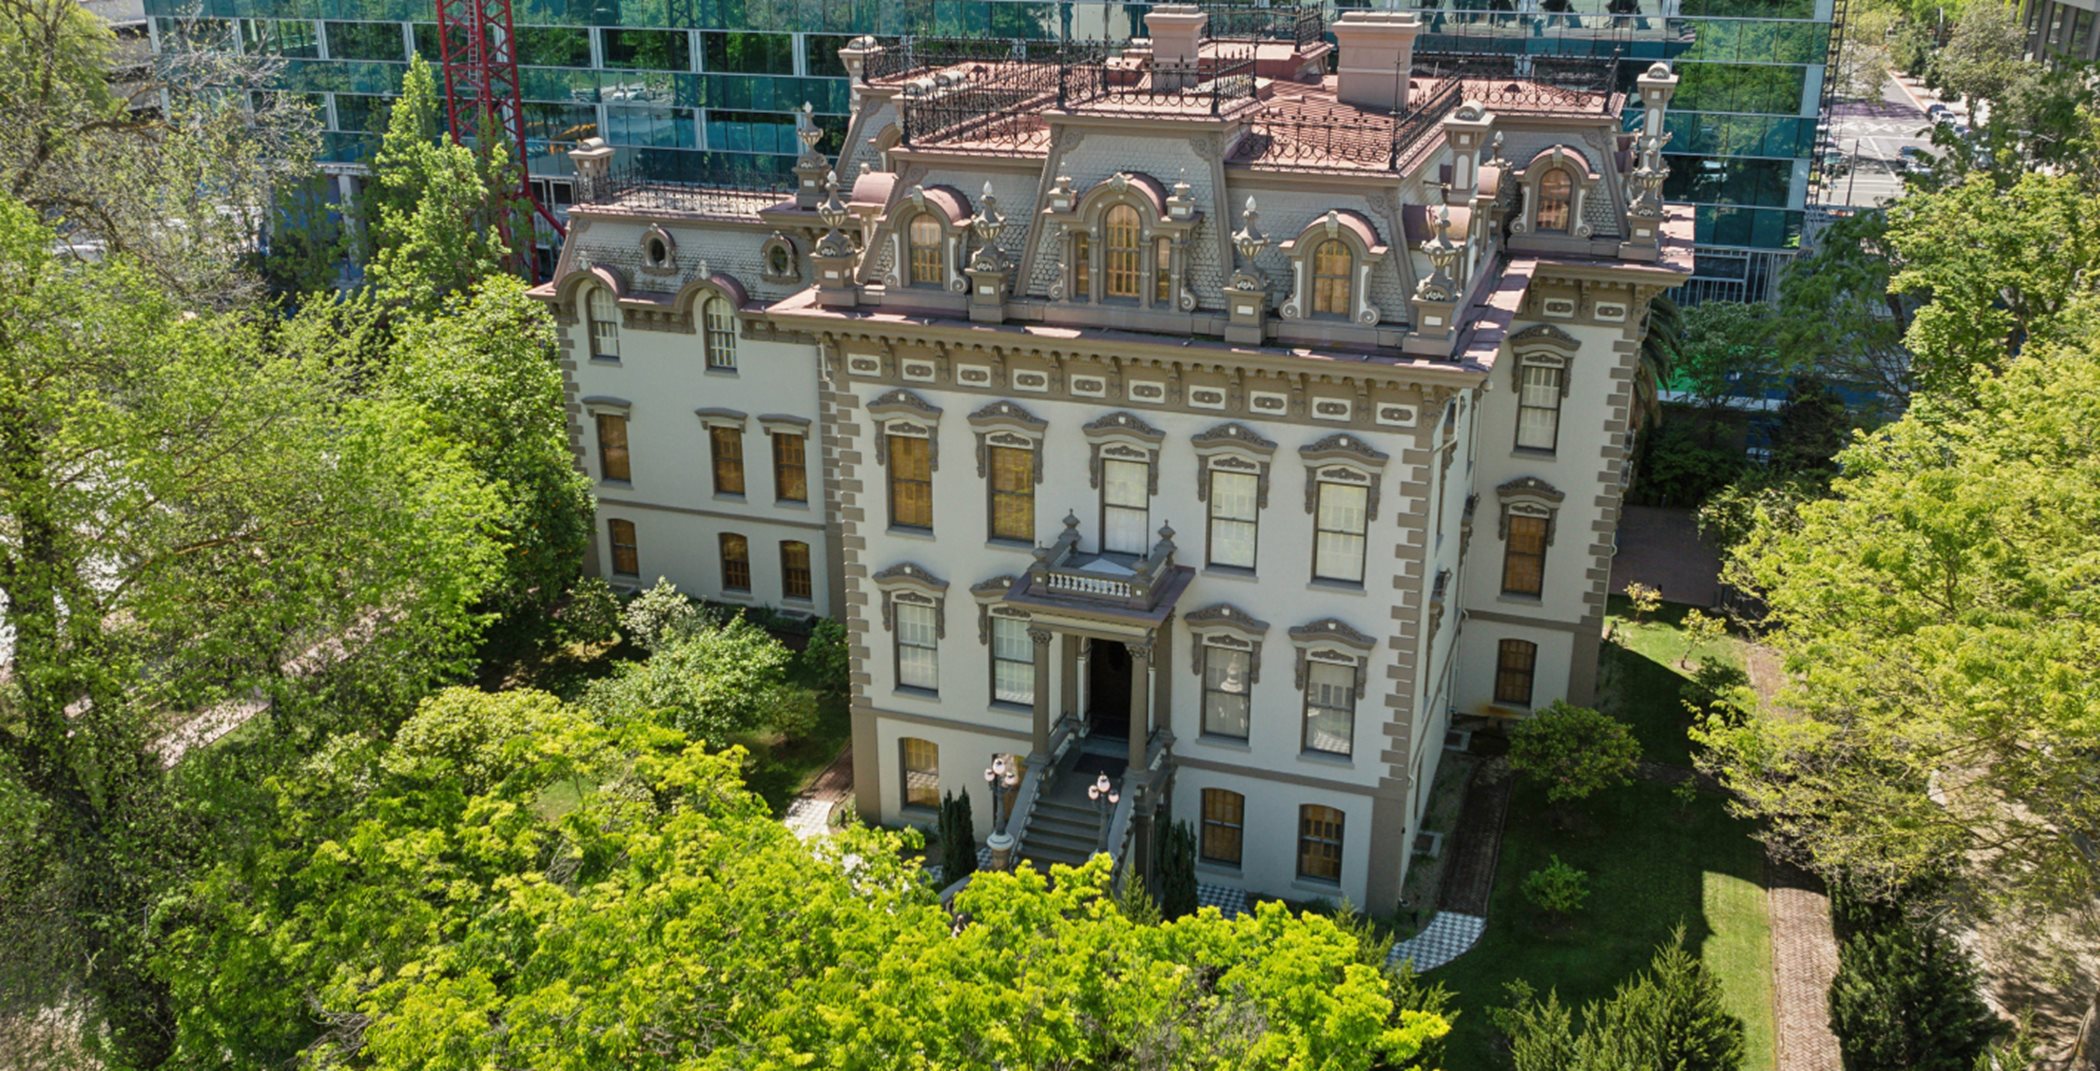 Aerial view of Leland Stanford Mansion surrounded by trees